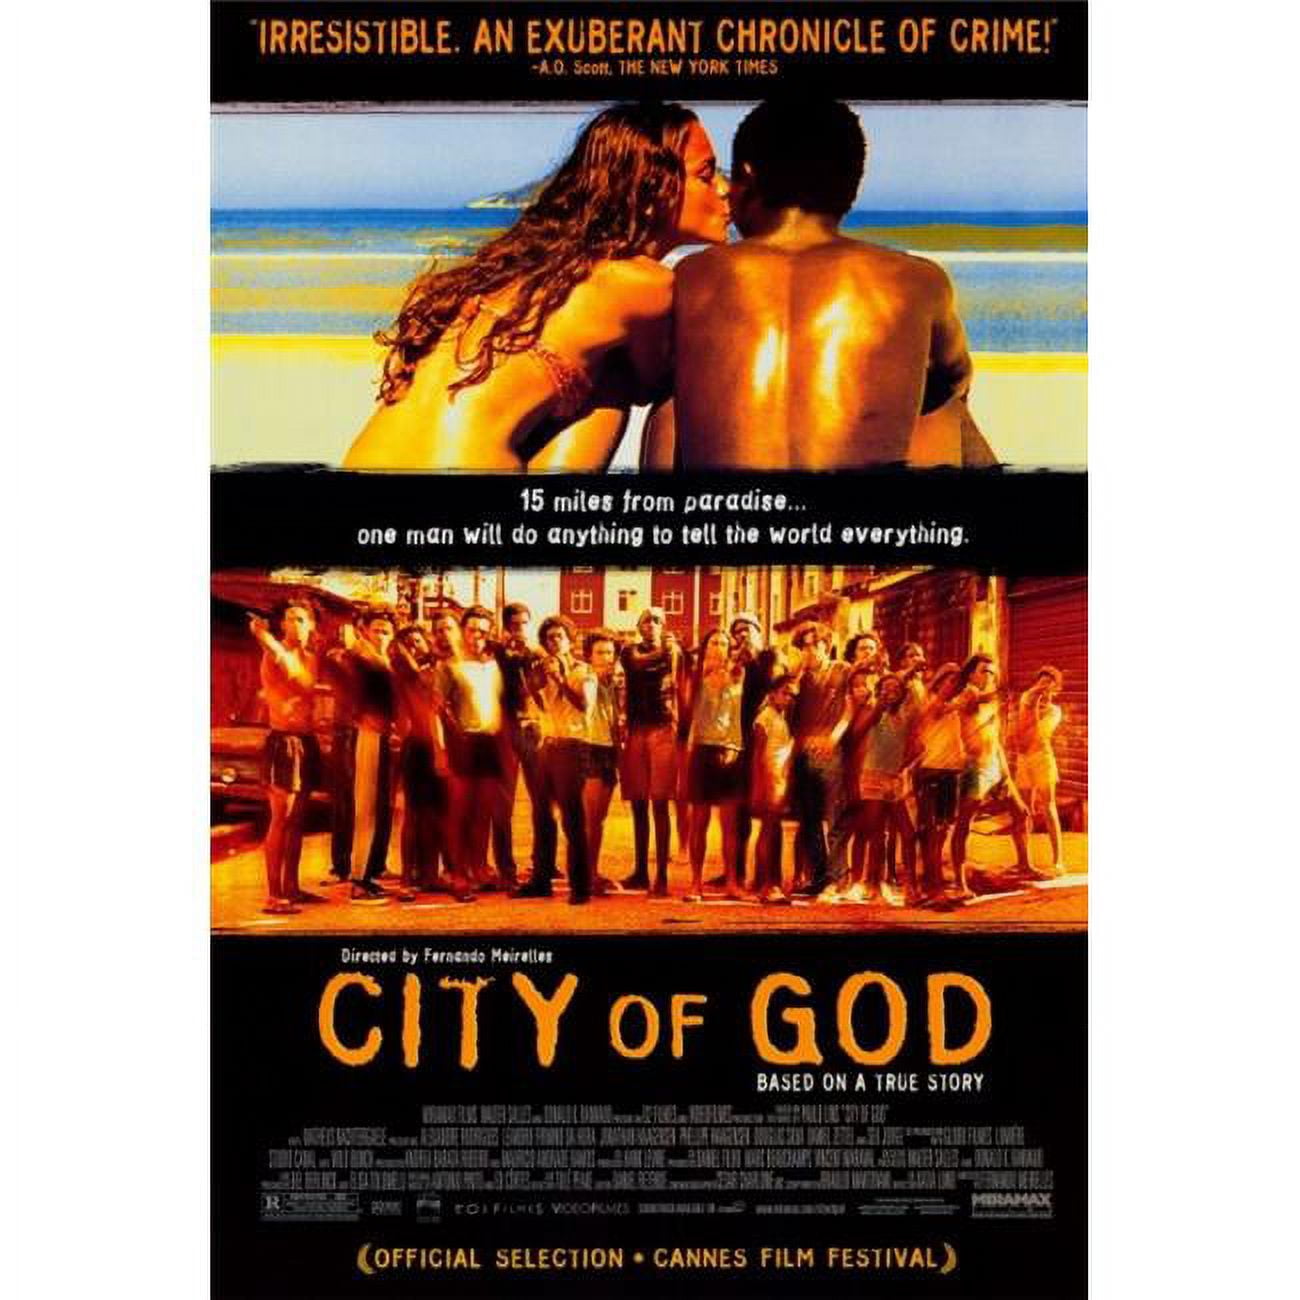 City Of God Poster Movie Wall Art Cult